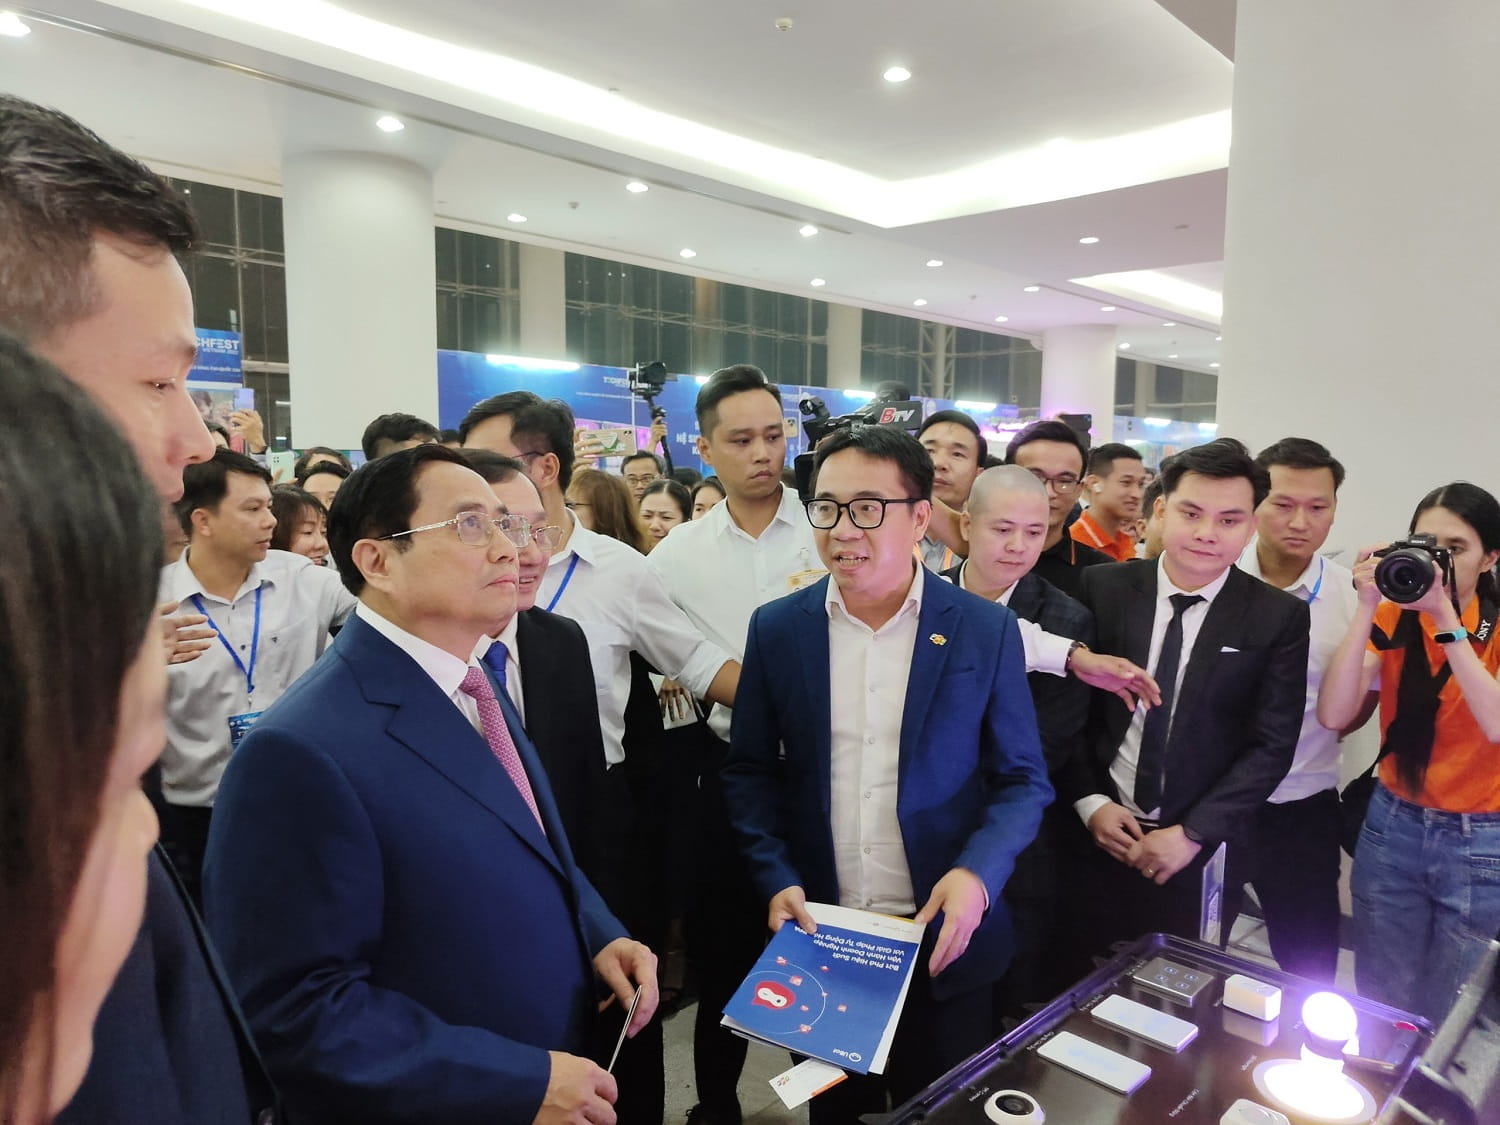 The representatives of FPT Corporation introduced the technology products and services with the theme "Tech creates more Joy" to Prime Minister Pham Minh Chinh